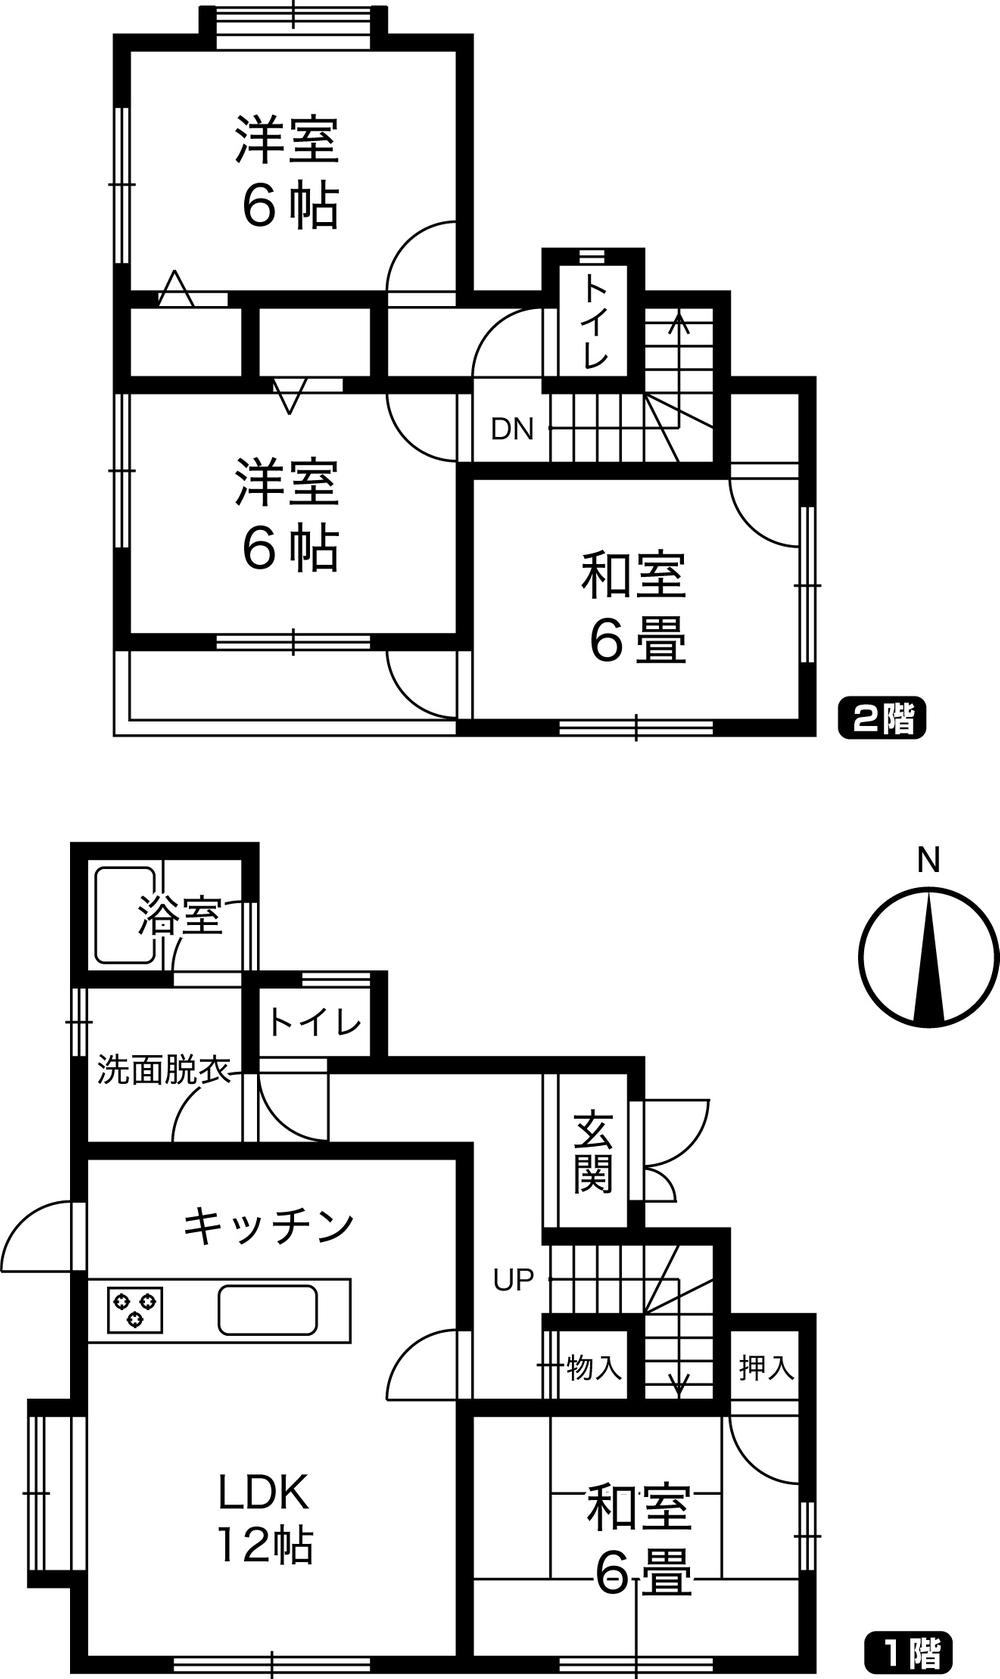 Floor plan. 11.8 million yen, 4LDK, Land area 165.31 sq m , The building area 86.94 sq m 2 floor 3 room 4LDK. Number of rooms in five families is I will have enough